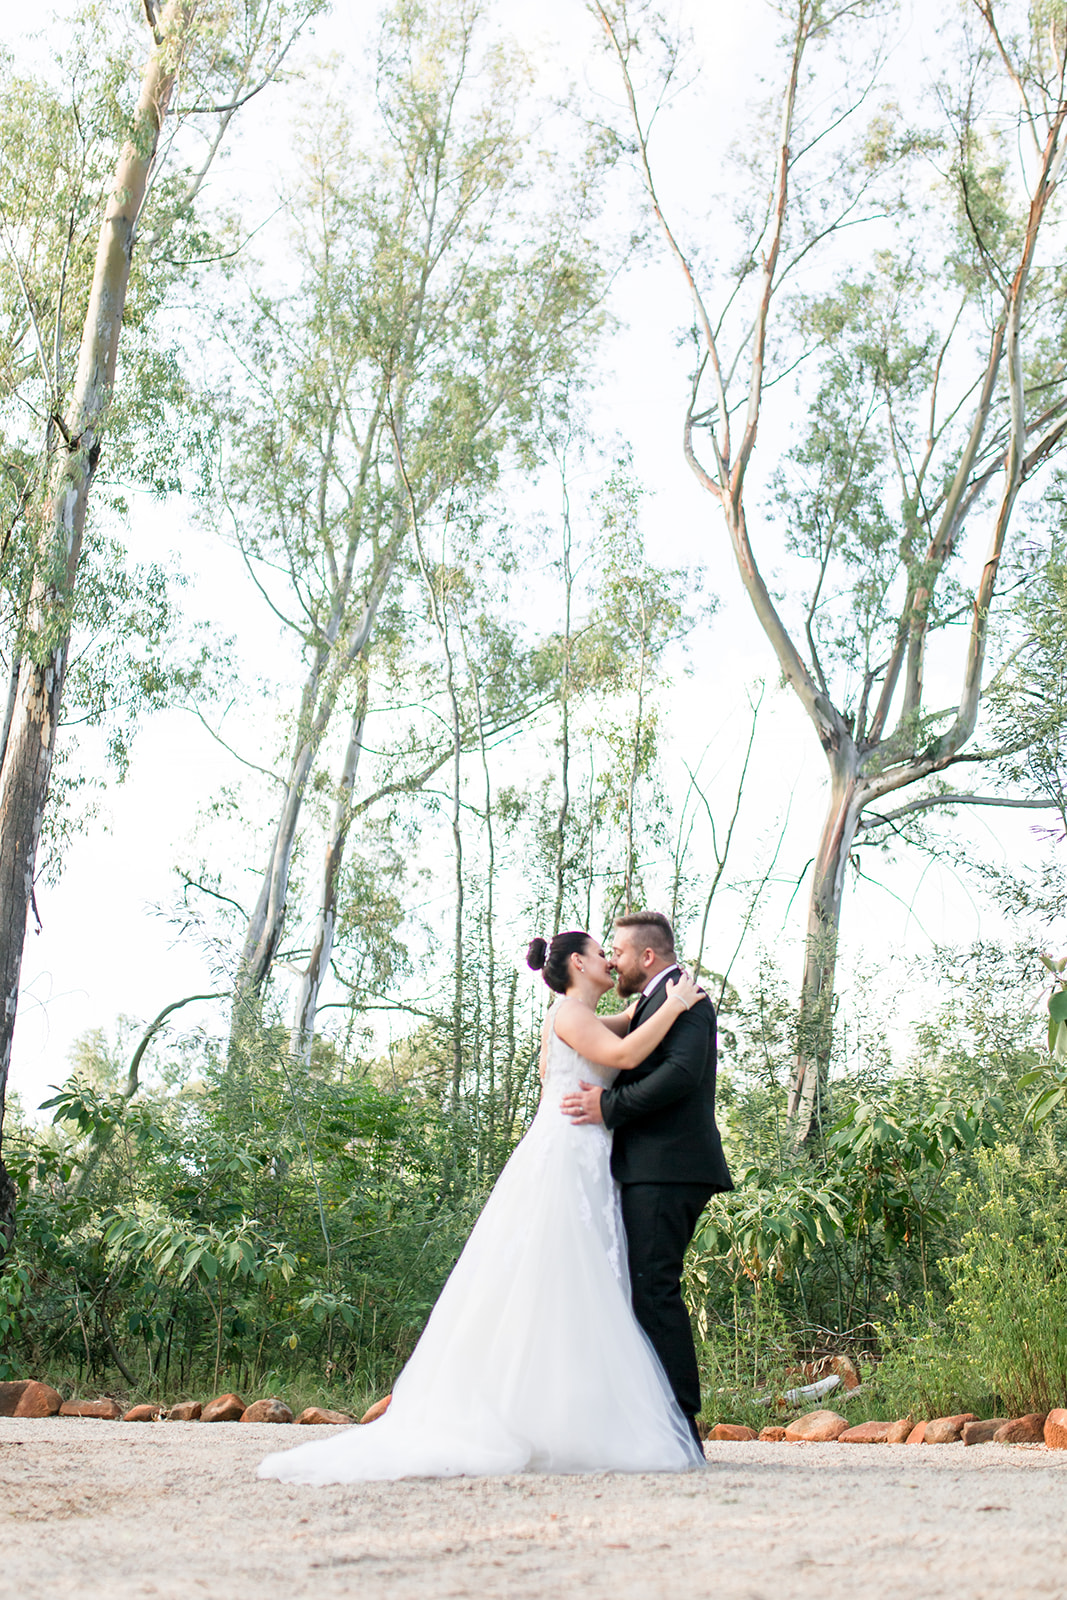 Lace on Timber Pretoria South Africa Wedding - The Overwhelmed Bride Wedding Blog